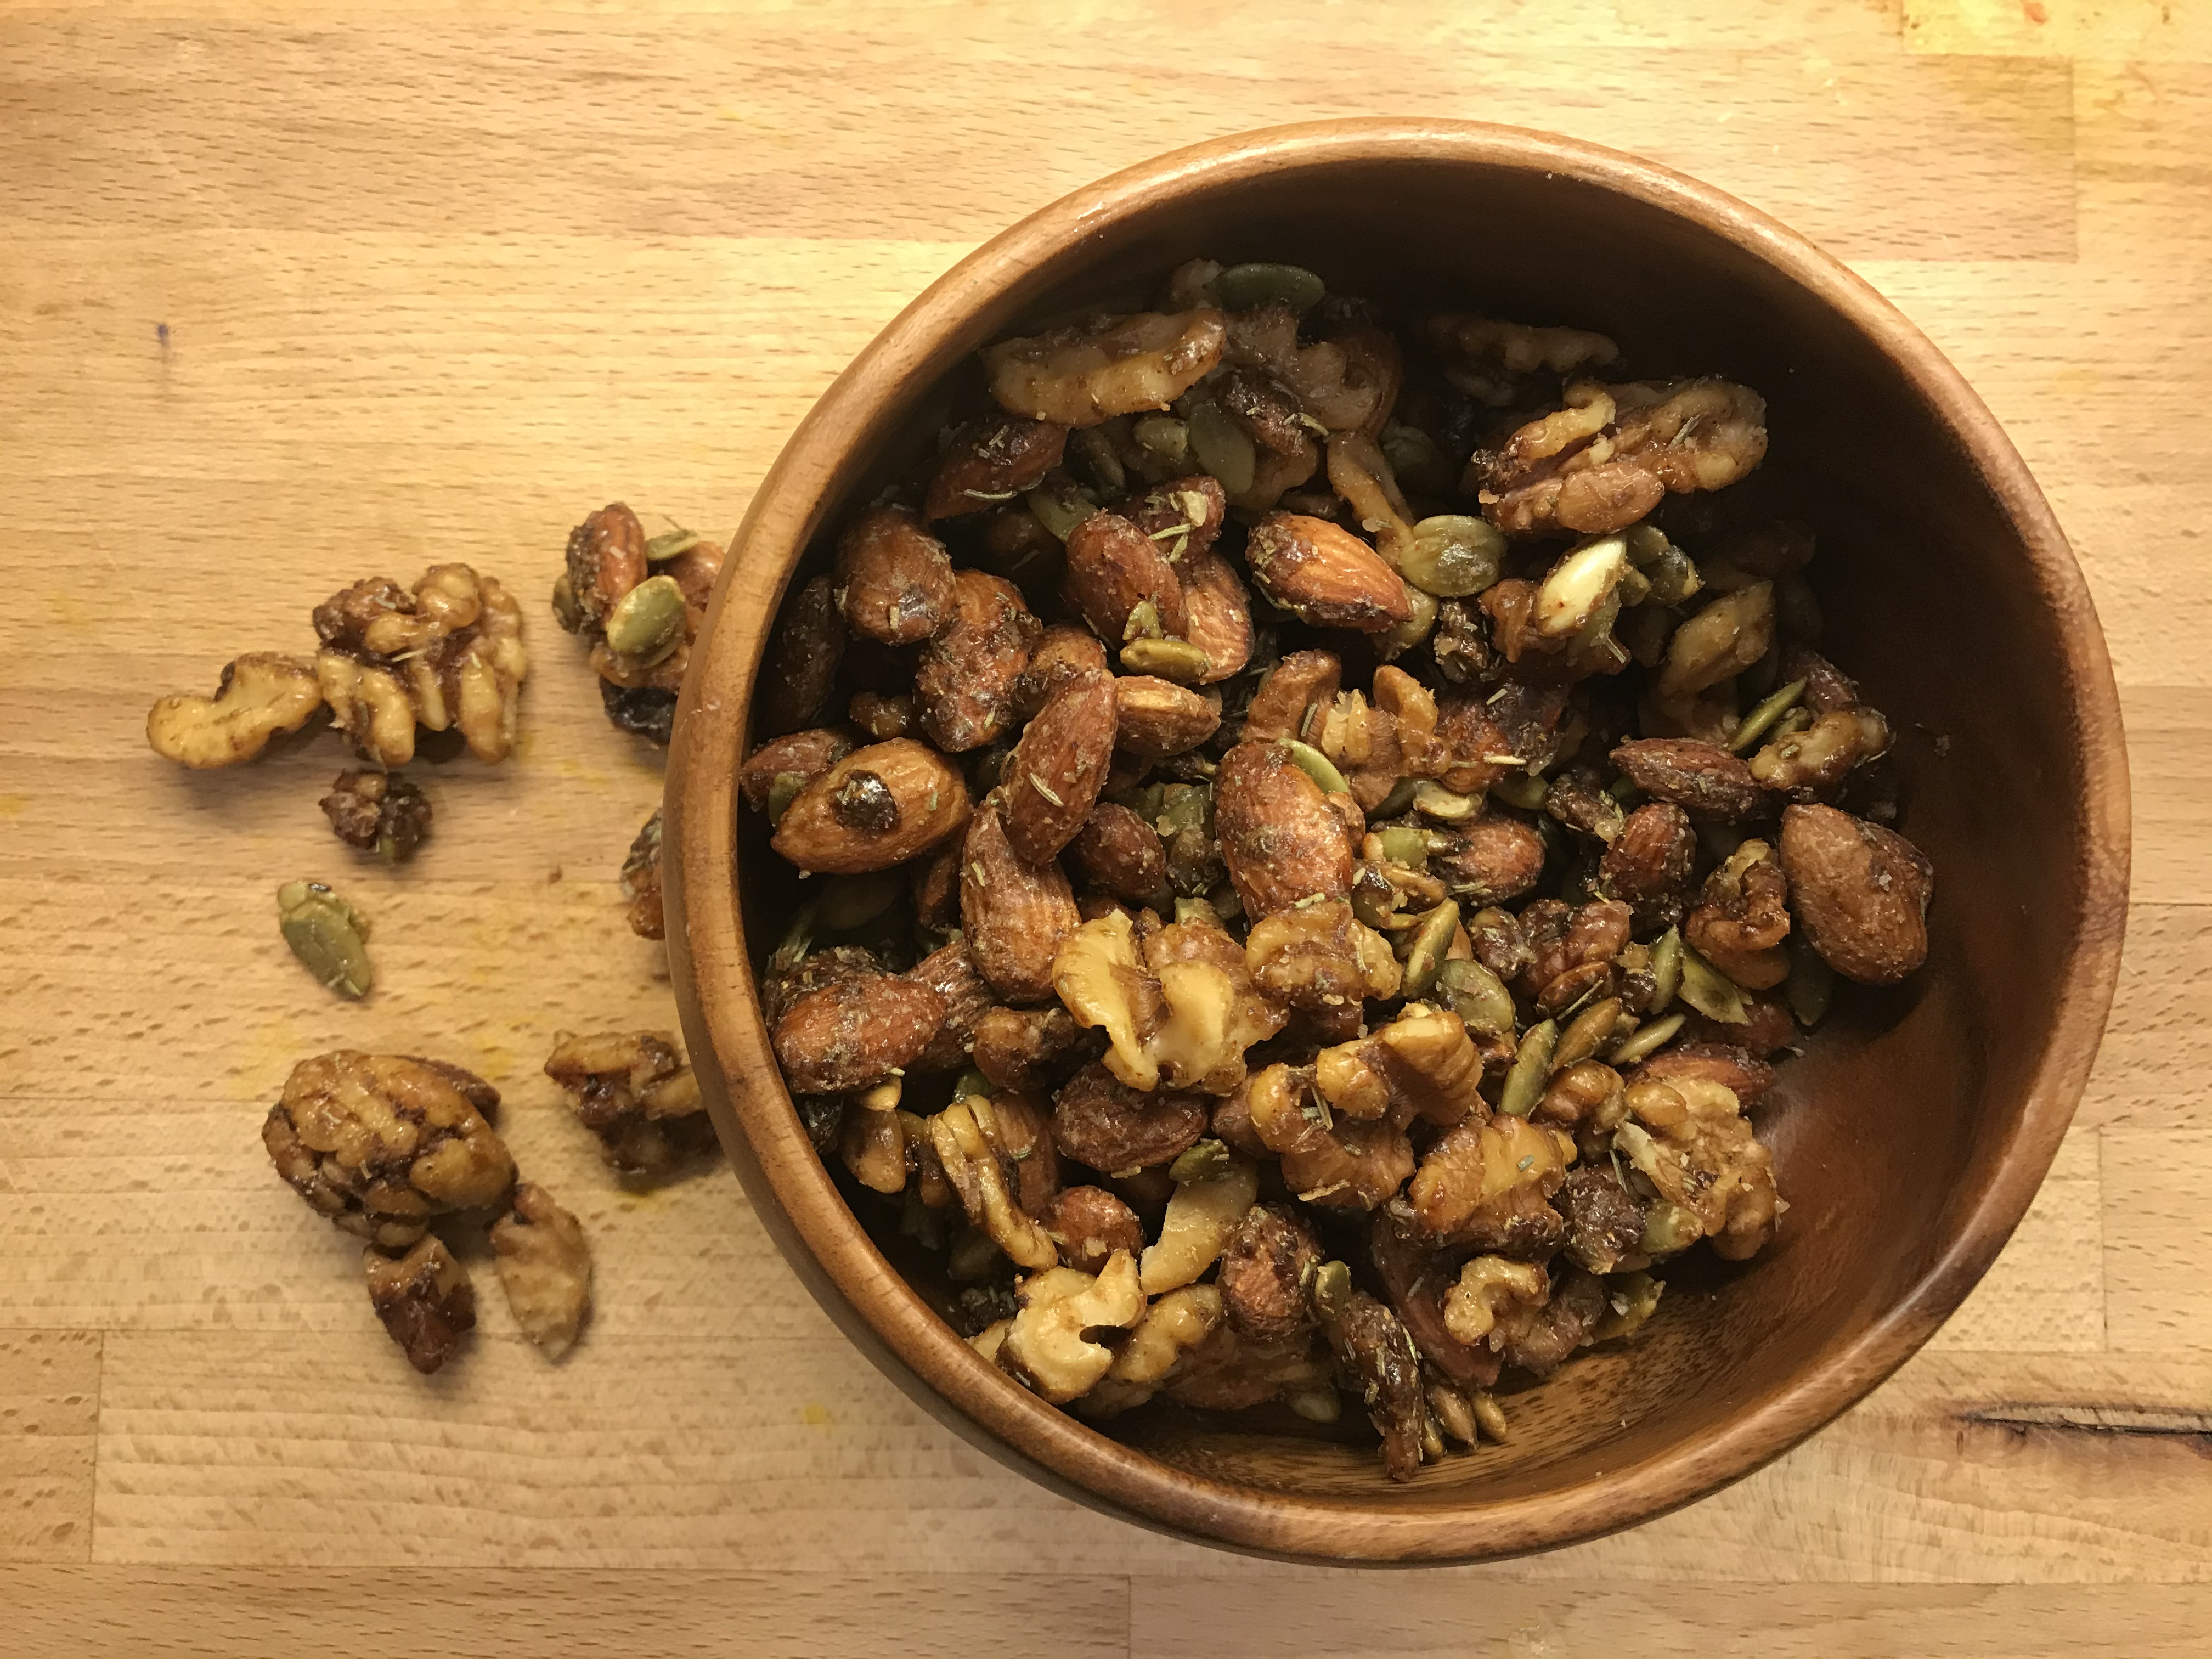 Spiced Nuts – simple ingredients and made in a short time